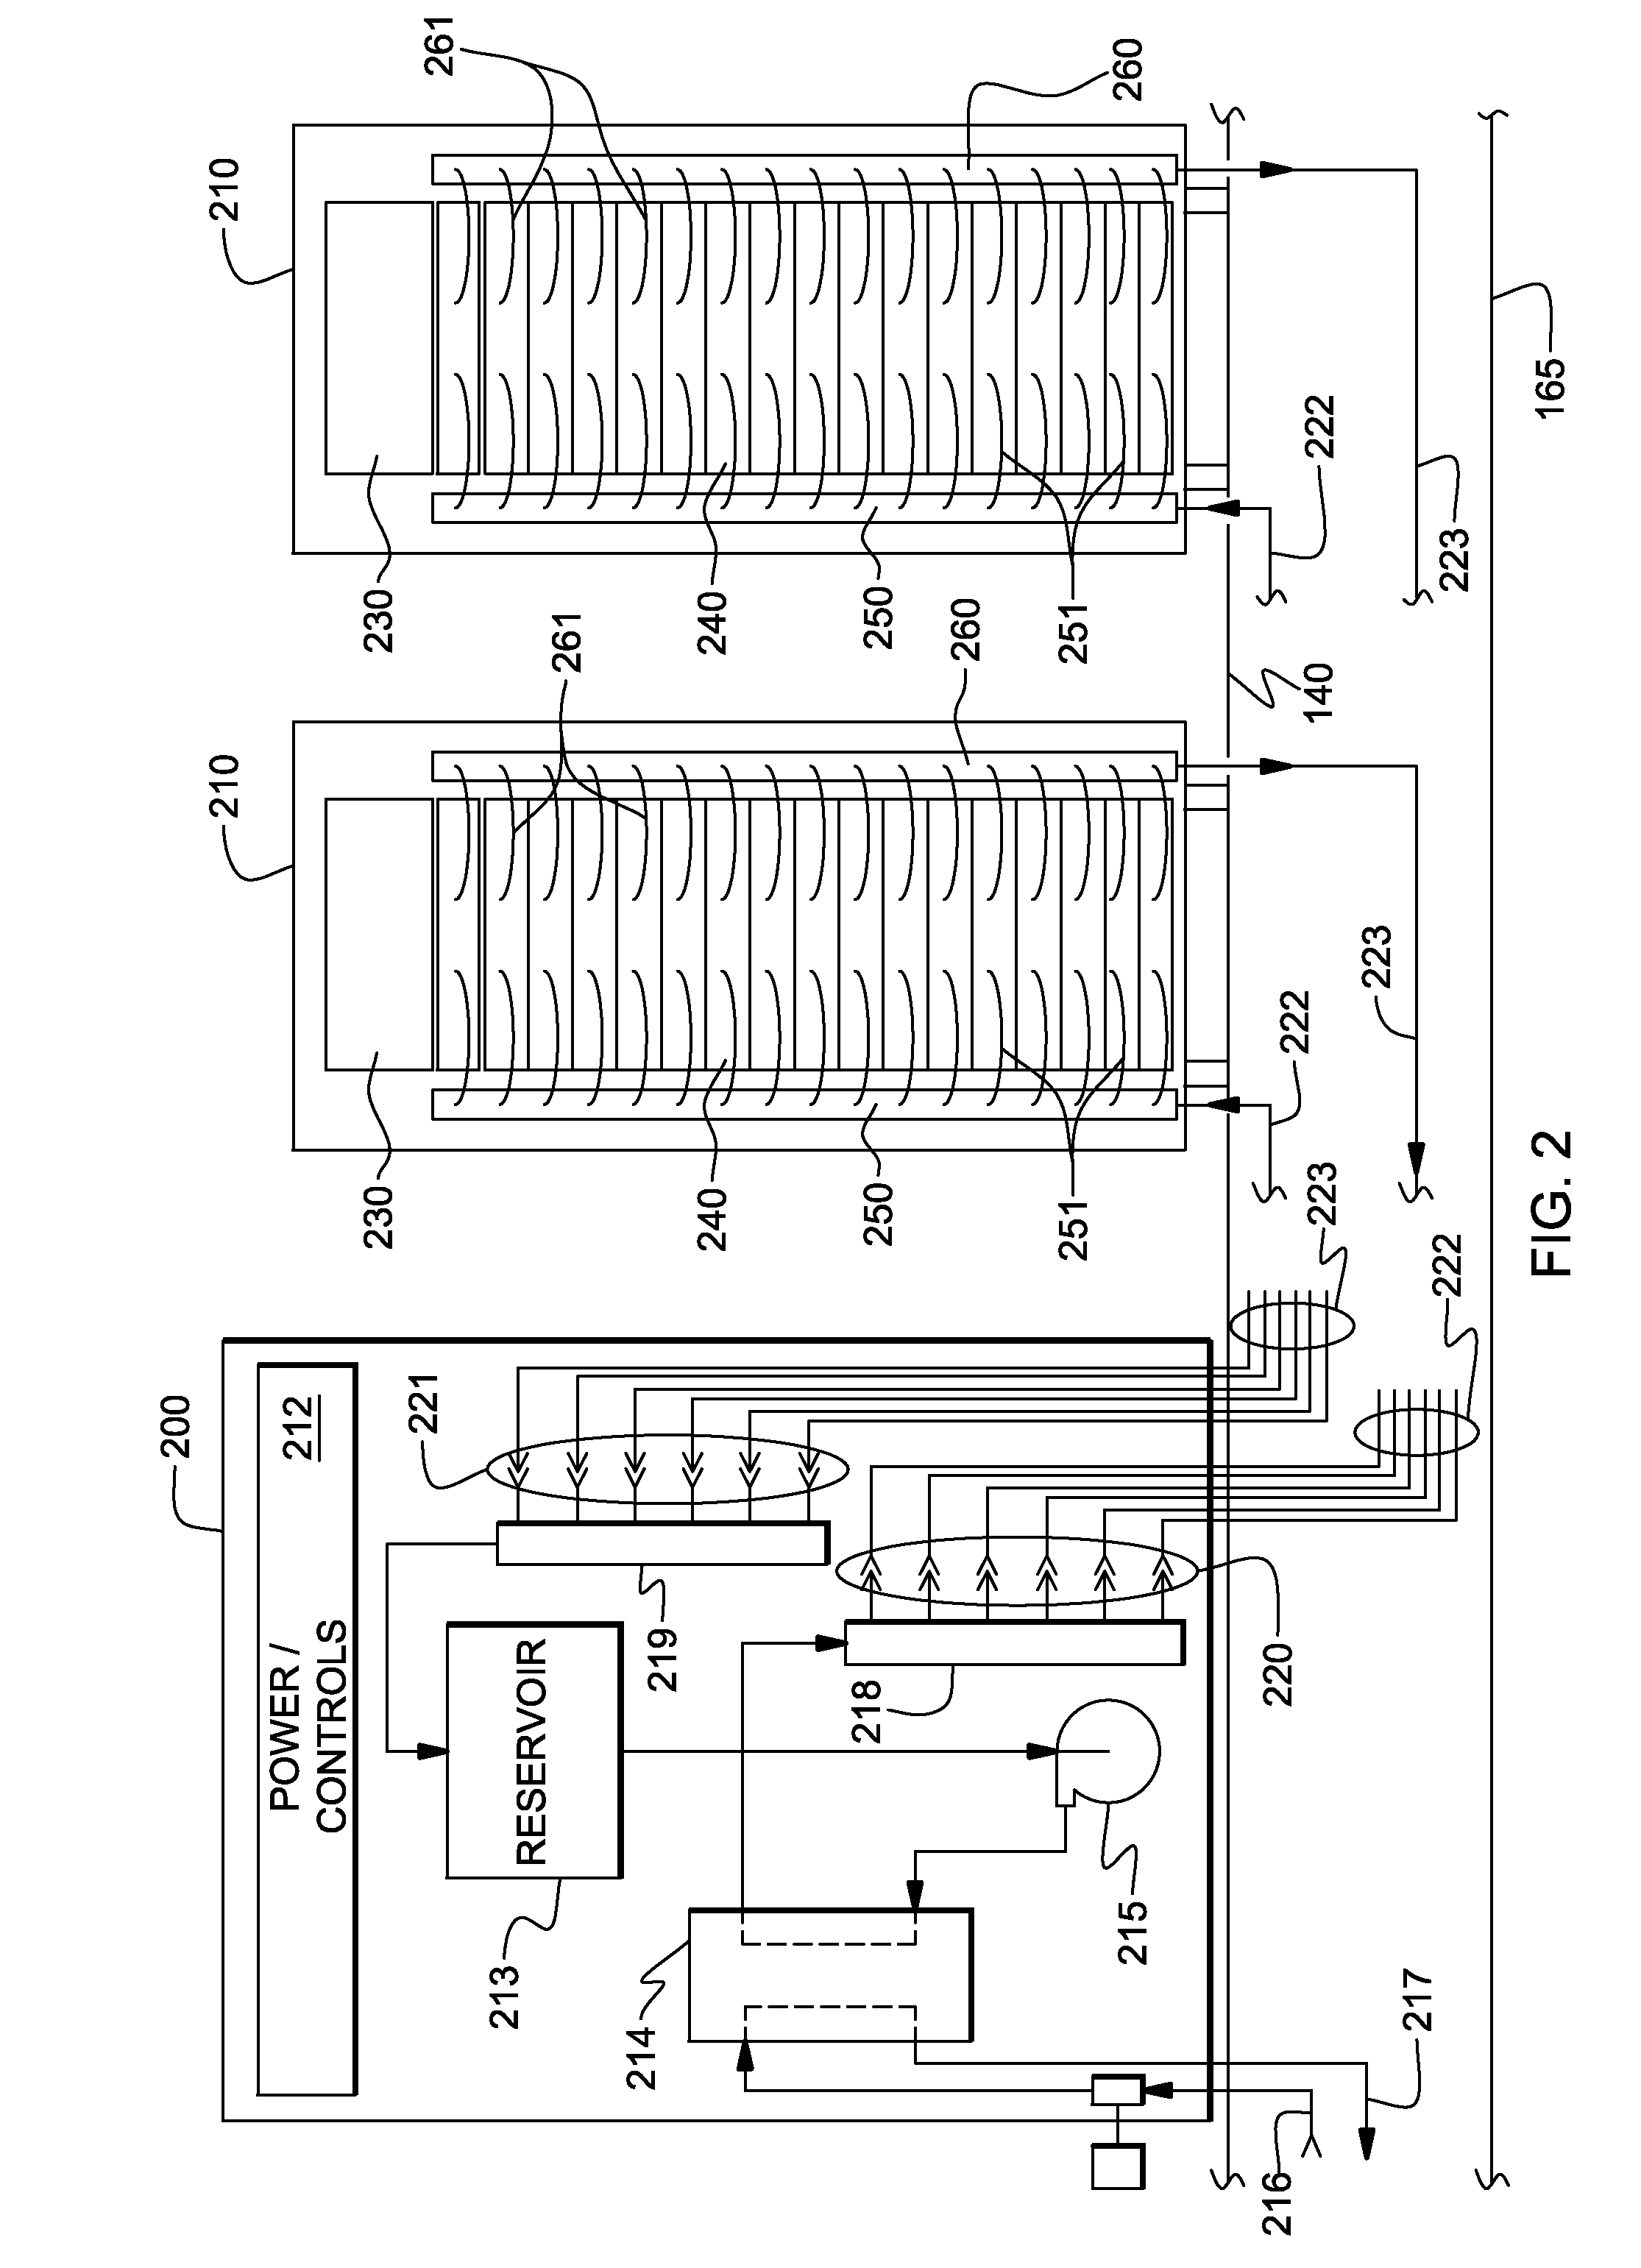 Vapor condenser with three-dimensional folded structure